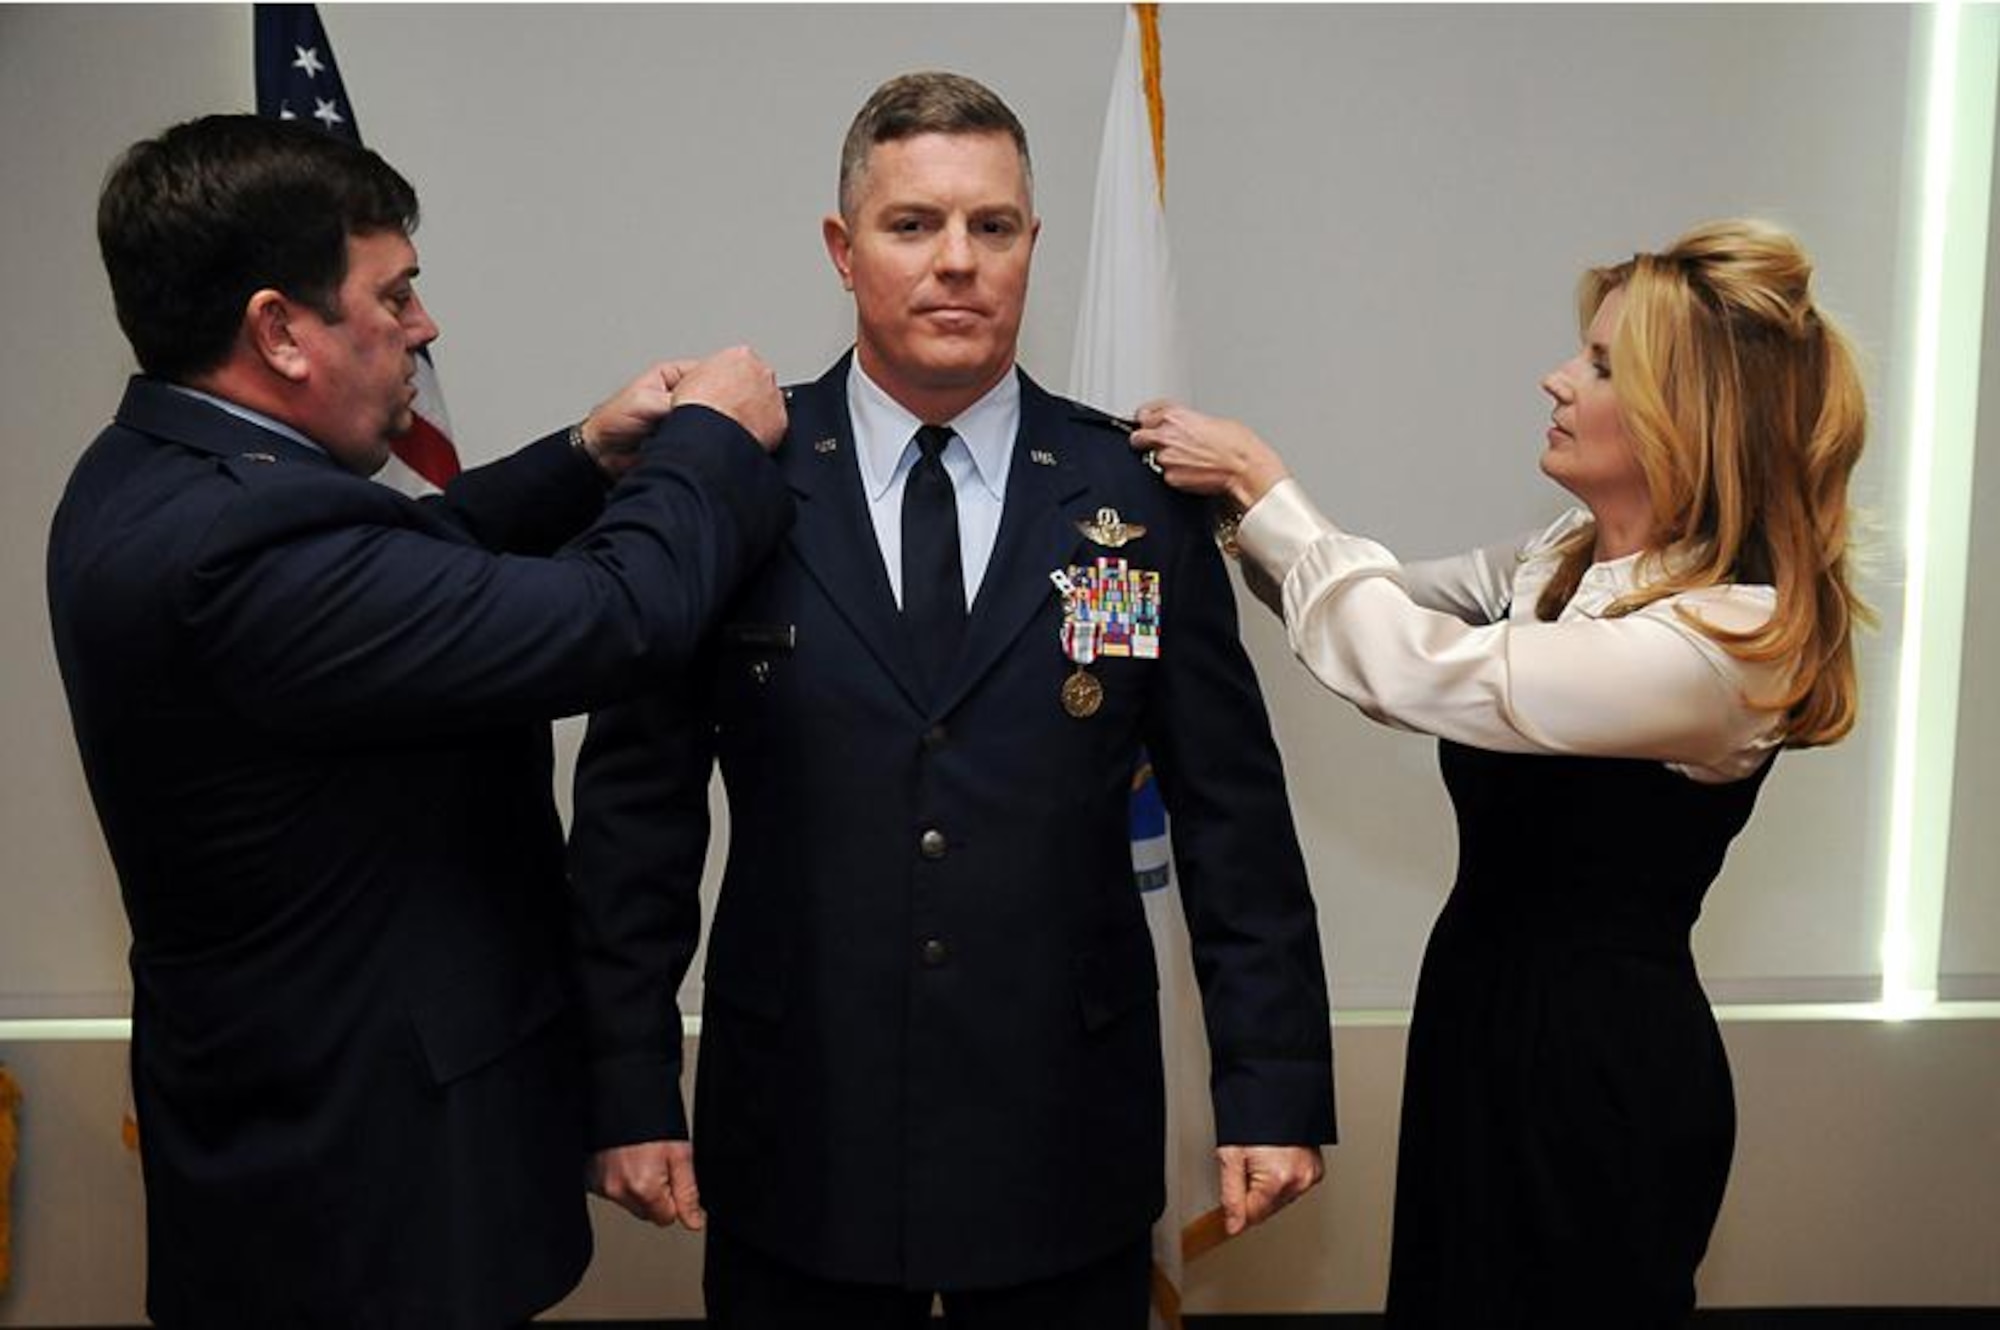 Brig. Gen. Gary Keefe, commander, Massachusetts Air National Guard, and Aprile Brooks pins the rank of Brigadier General on the uniform of Robert Brooks Jr., during a promotion ceremony at the Massachusetts National Guard's Joint Force Headquarters building, Hanscom Air Force Base, Bedford, Mass., Jan. 25, 2013. Brooks serves as the Assistant Adjutant General- Air, Massachusetts Air National Guard.